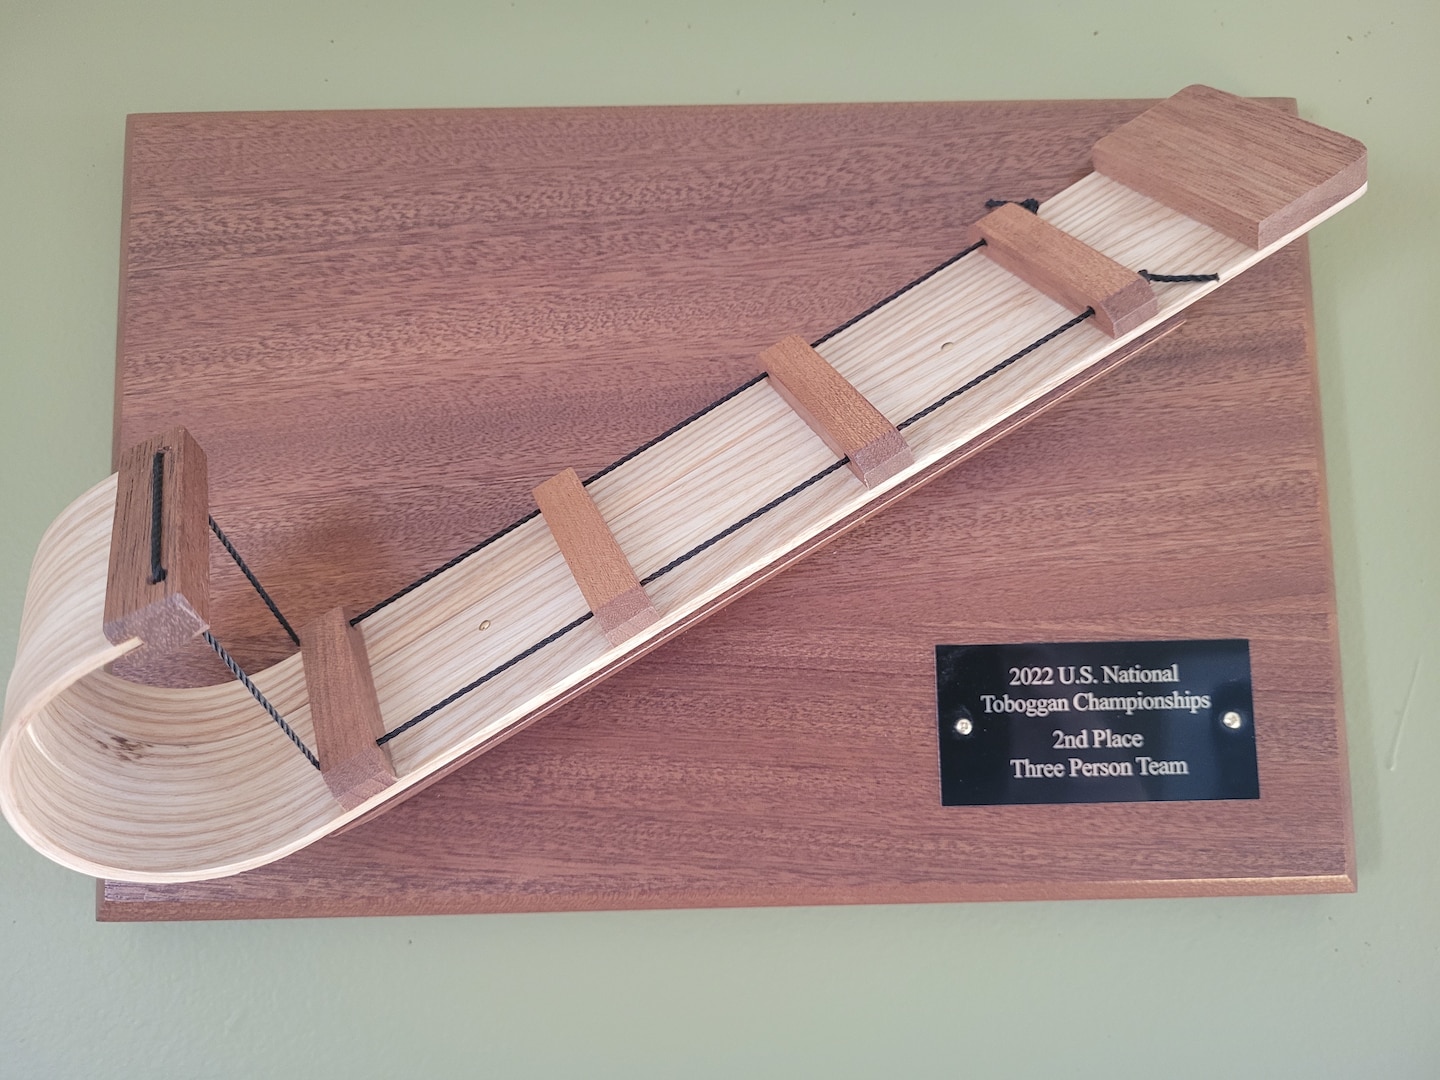 The second place trophy won by Russell Sherman, quality assurance team leader with DCMA Hartford, and his team during the 2022 National Tobogganing Championship.